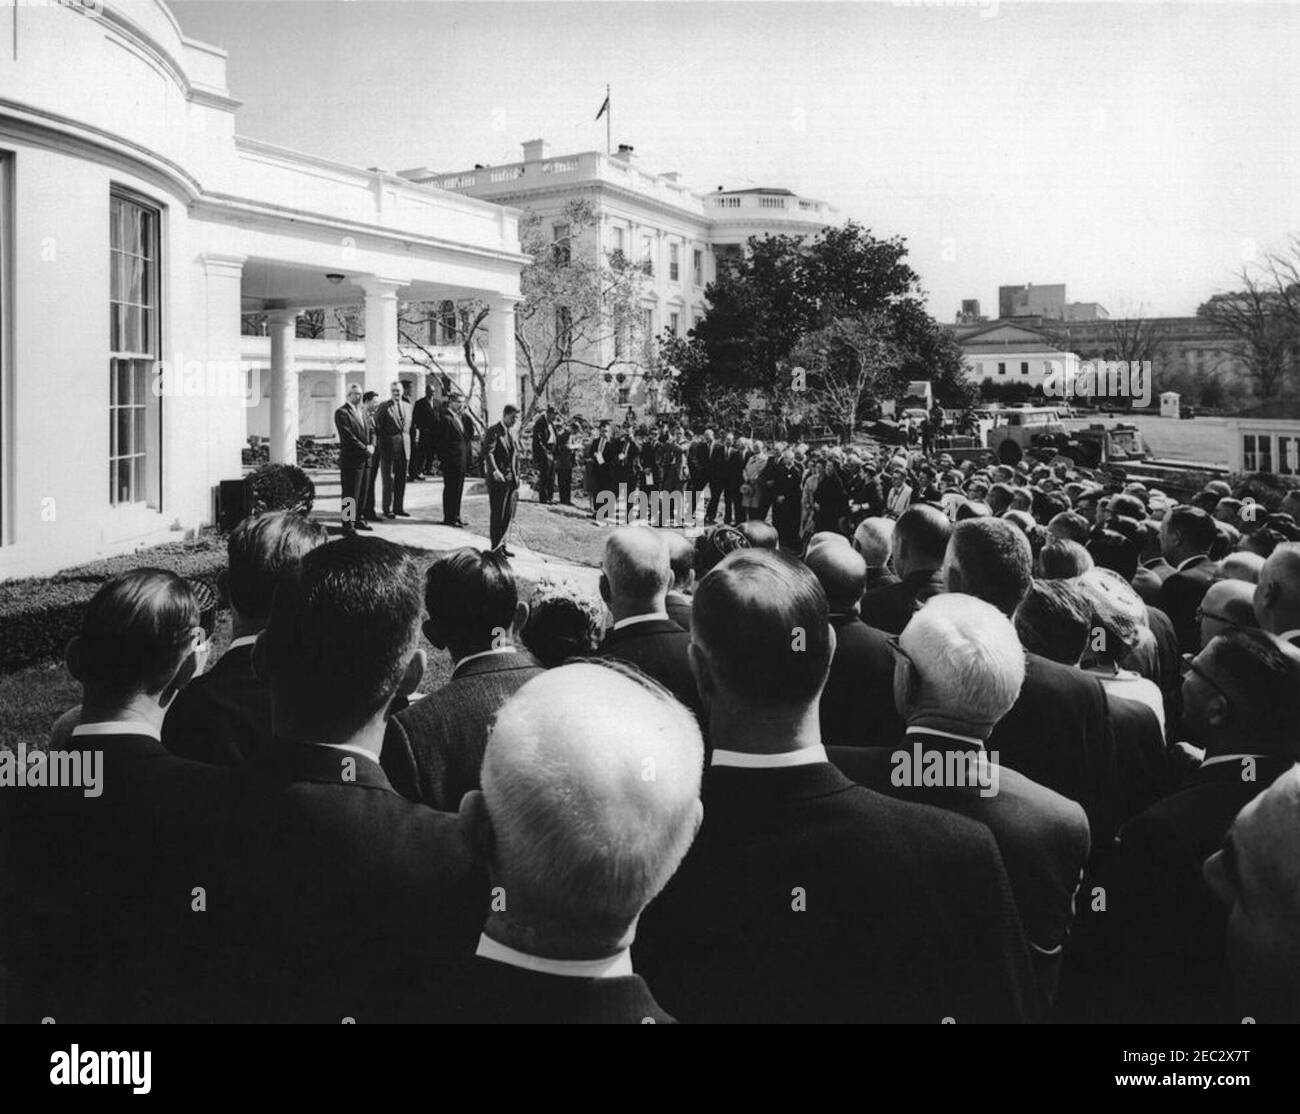 Meeting with members of the Agricultural Stabilization u0026 Conservation Committees, 9:45AM. President John F. Kennedy (back left) addresses members of the Agricultural Stabilization and Conservation (ASC) committees on the West Wing Lawn of the White House, Washington, D.C. Standing behind President Kennedy are (L-R): Assistant Secretary of Agriculture for Marketing and Foreign Agriculture John P. Duncan, Jr., two unidentified ASC committee representatives, and Secretary of Agriculture Orville L. Freeman. United Press International (UPI) photographer James K. W. Atherton stands with the gro Stock Photo